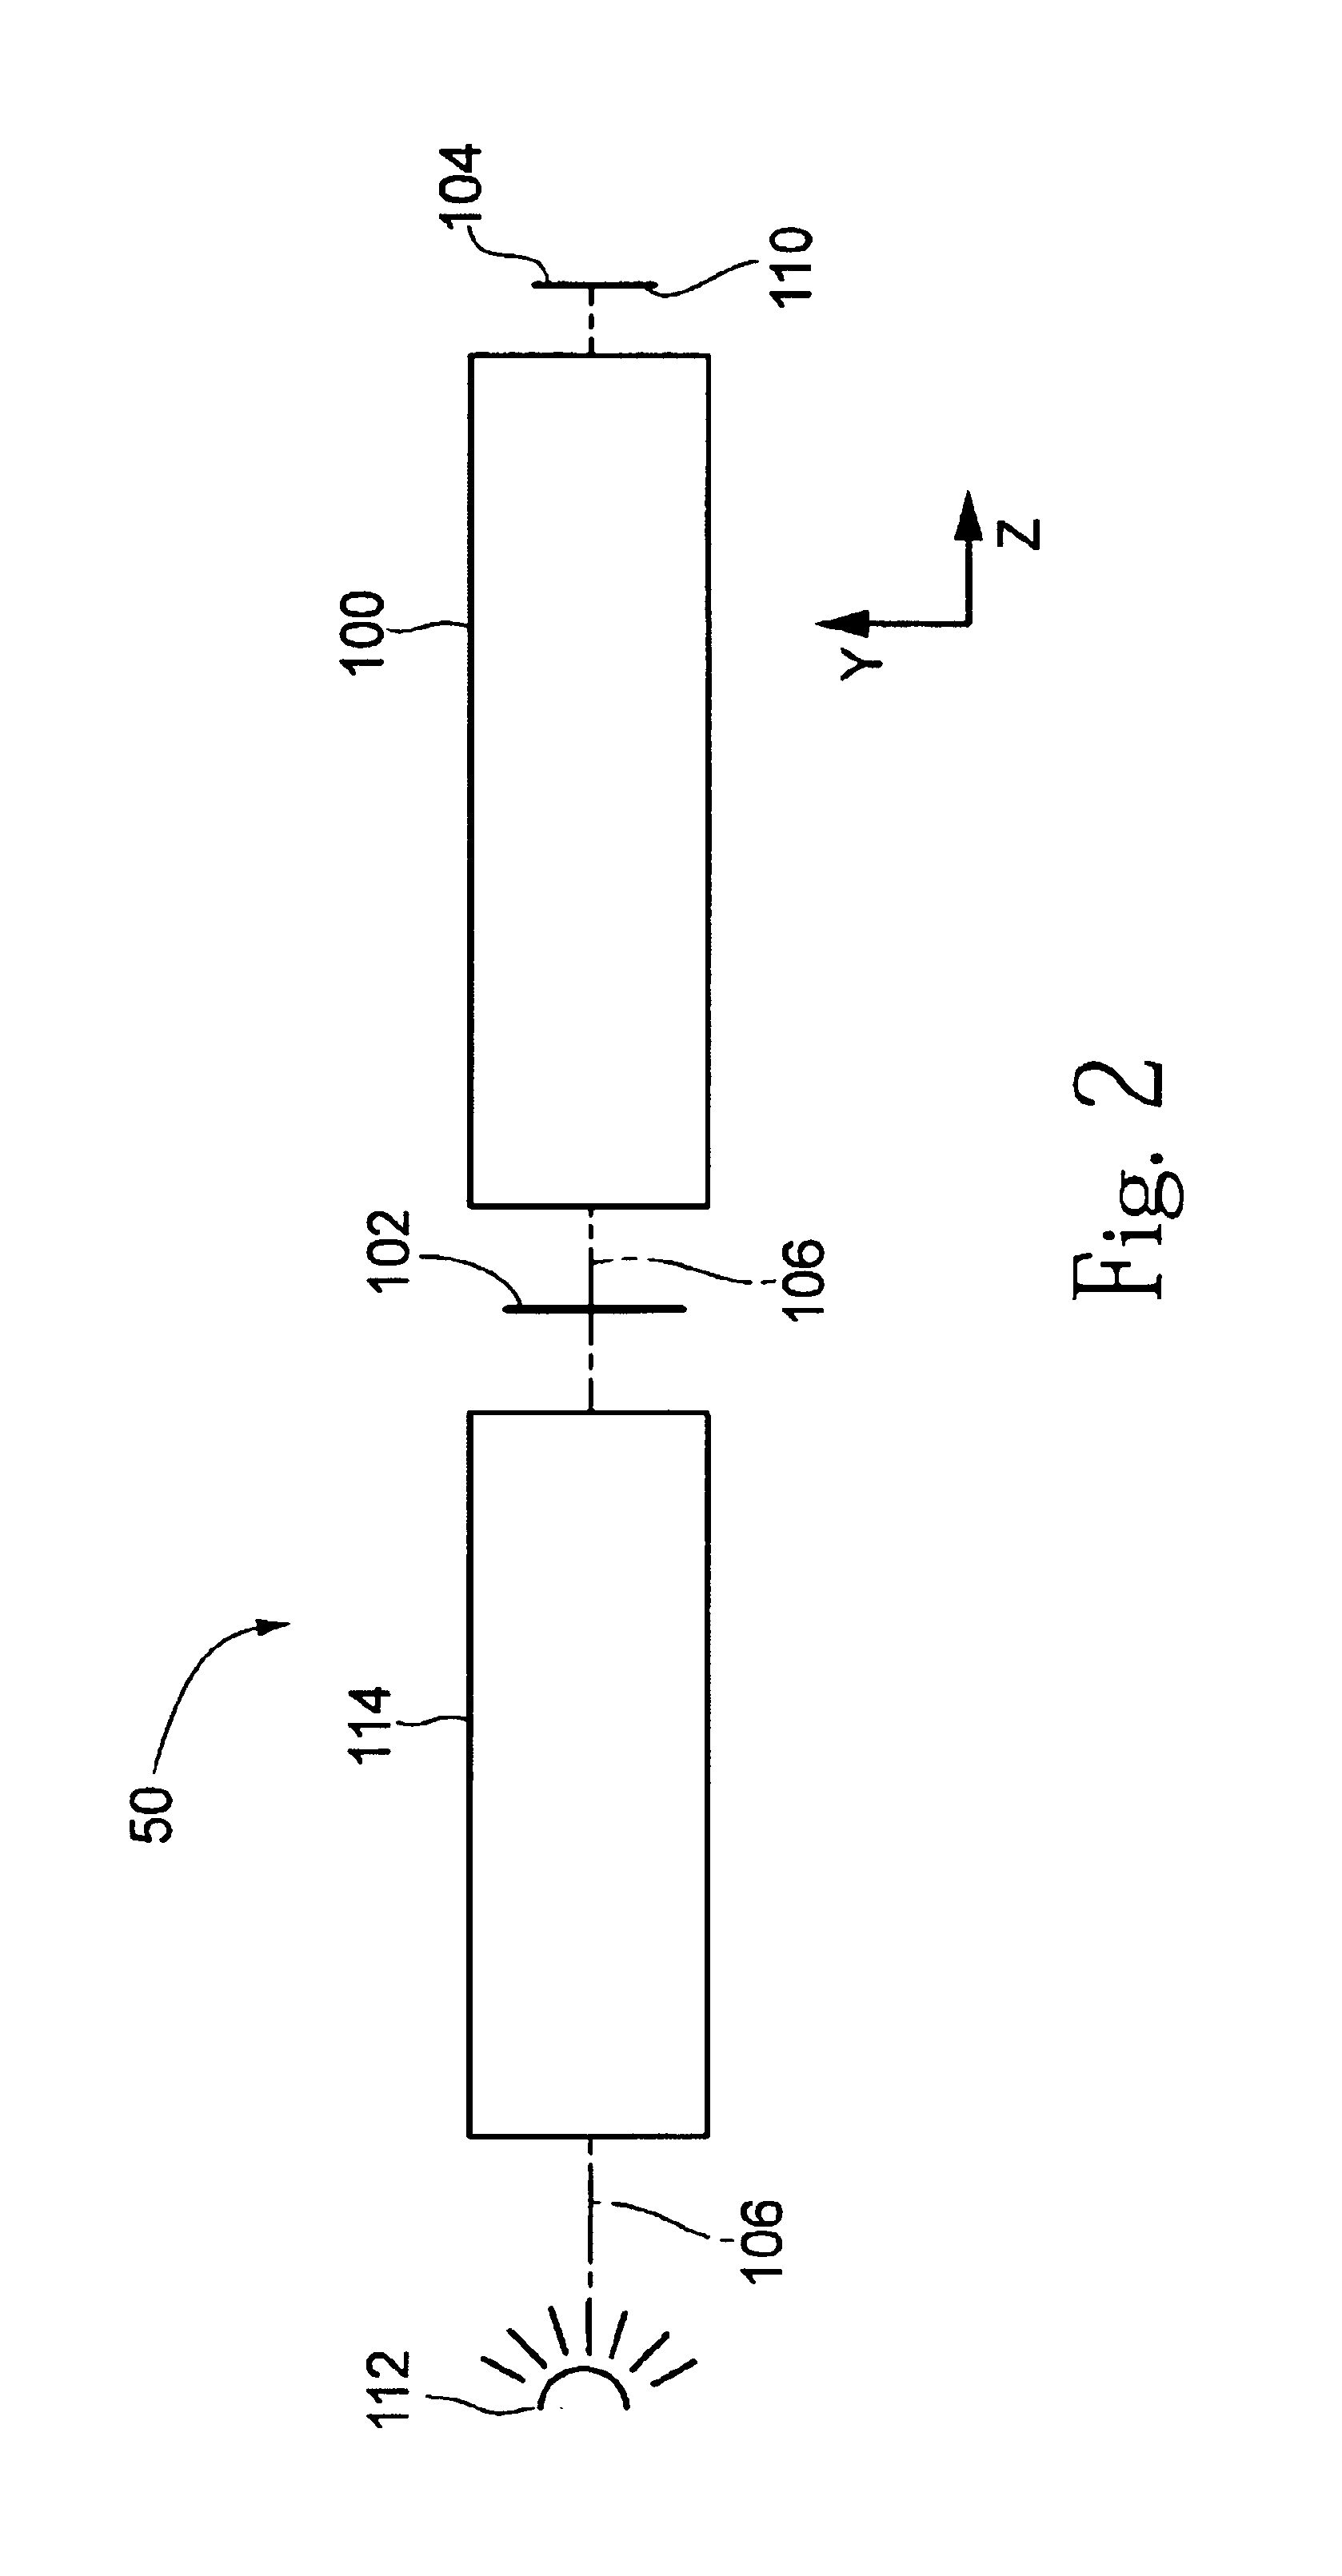 Structures and methods for reducing polarization aberration in integrated circuit fabrication systems